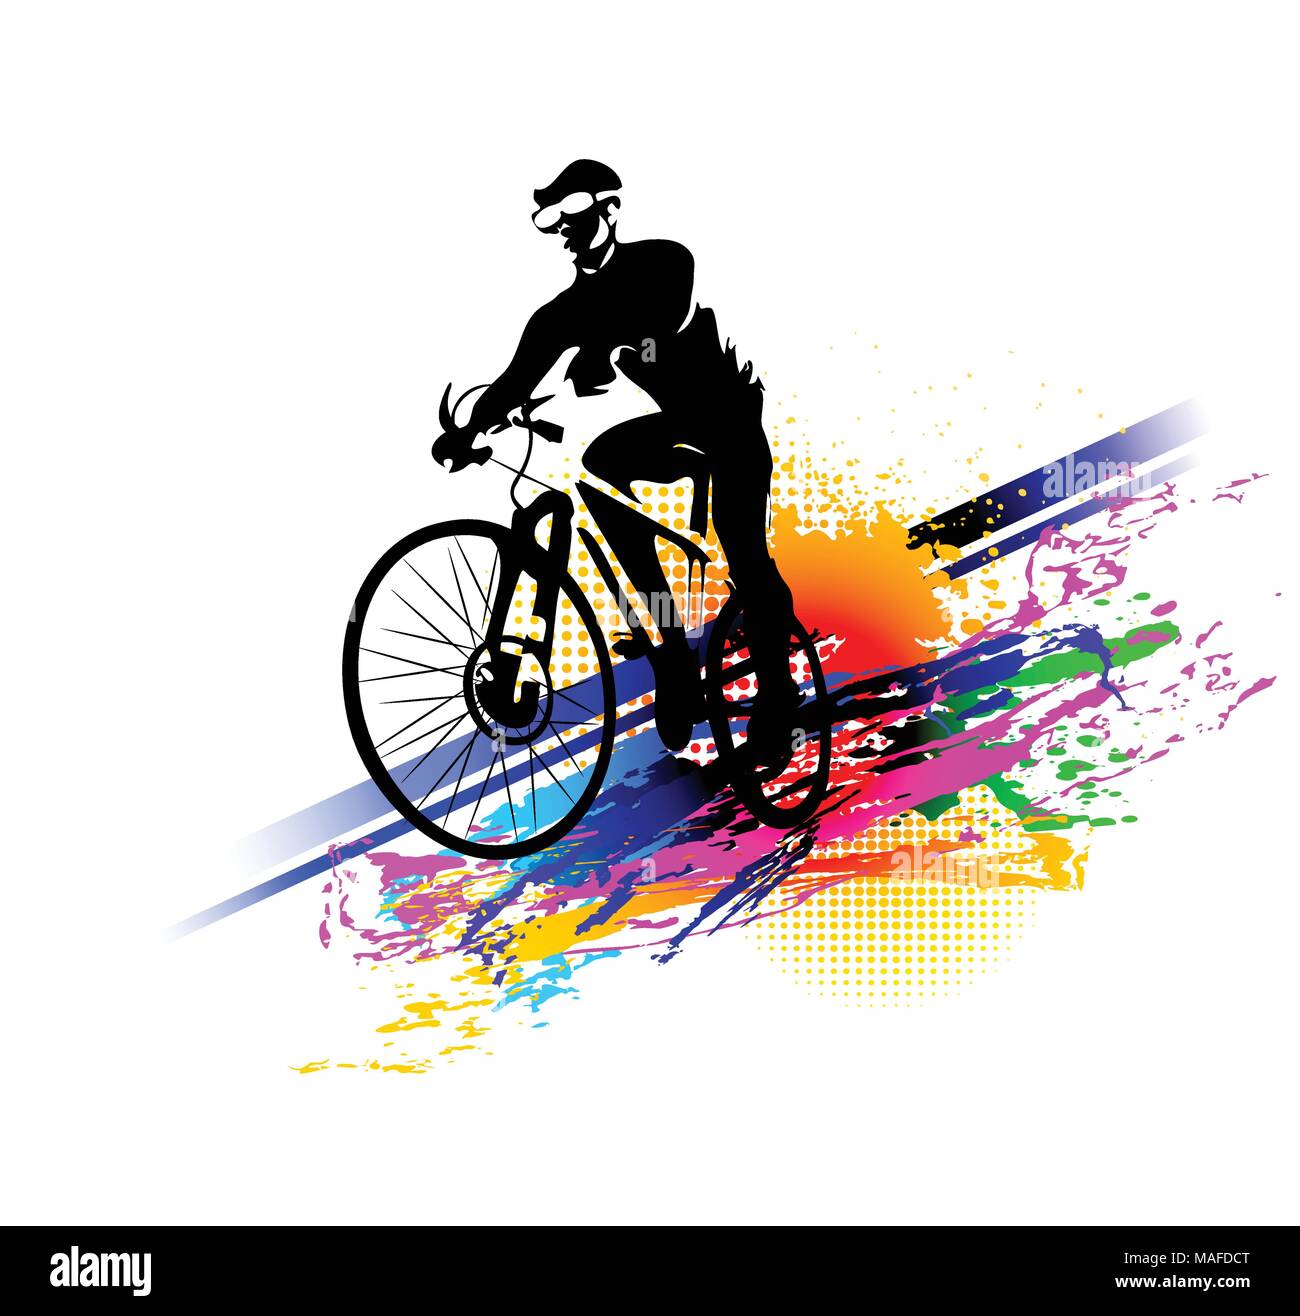 Cycling man. Extreme sports vector illustration. Stock Vector